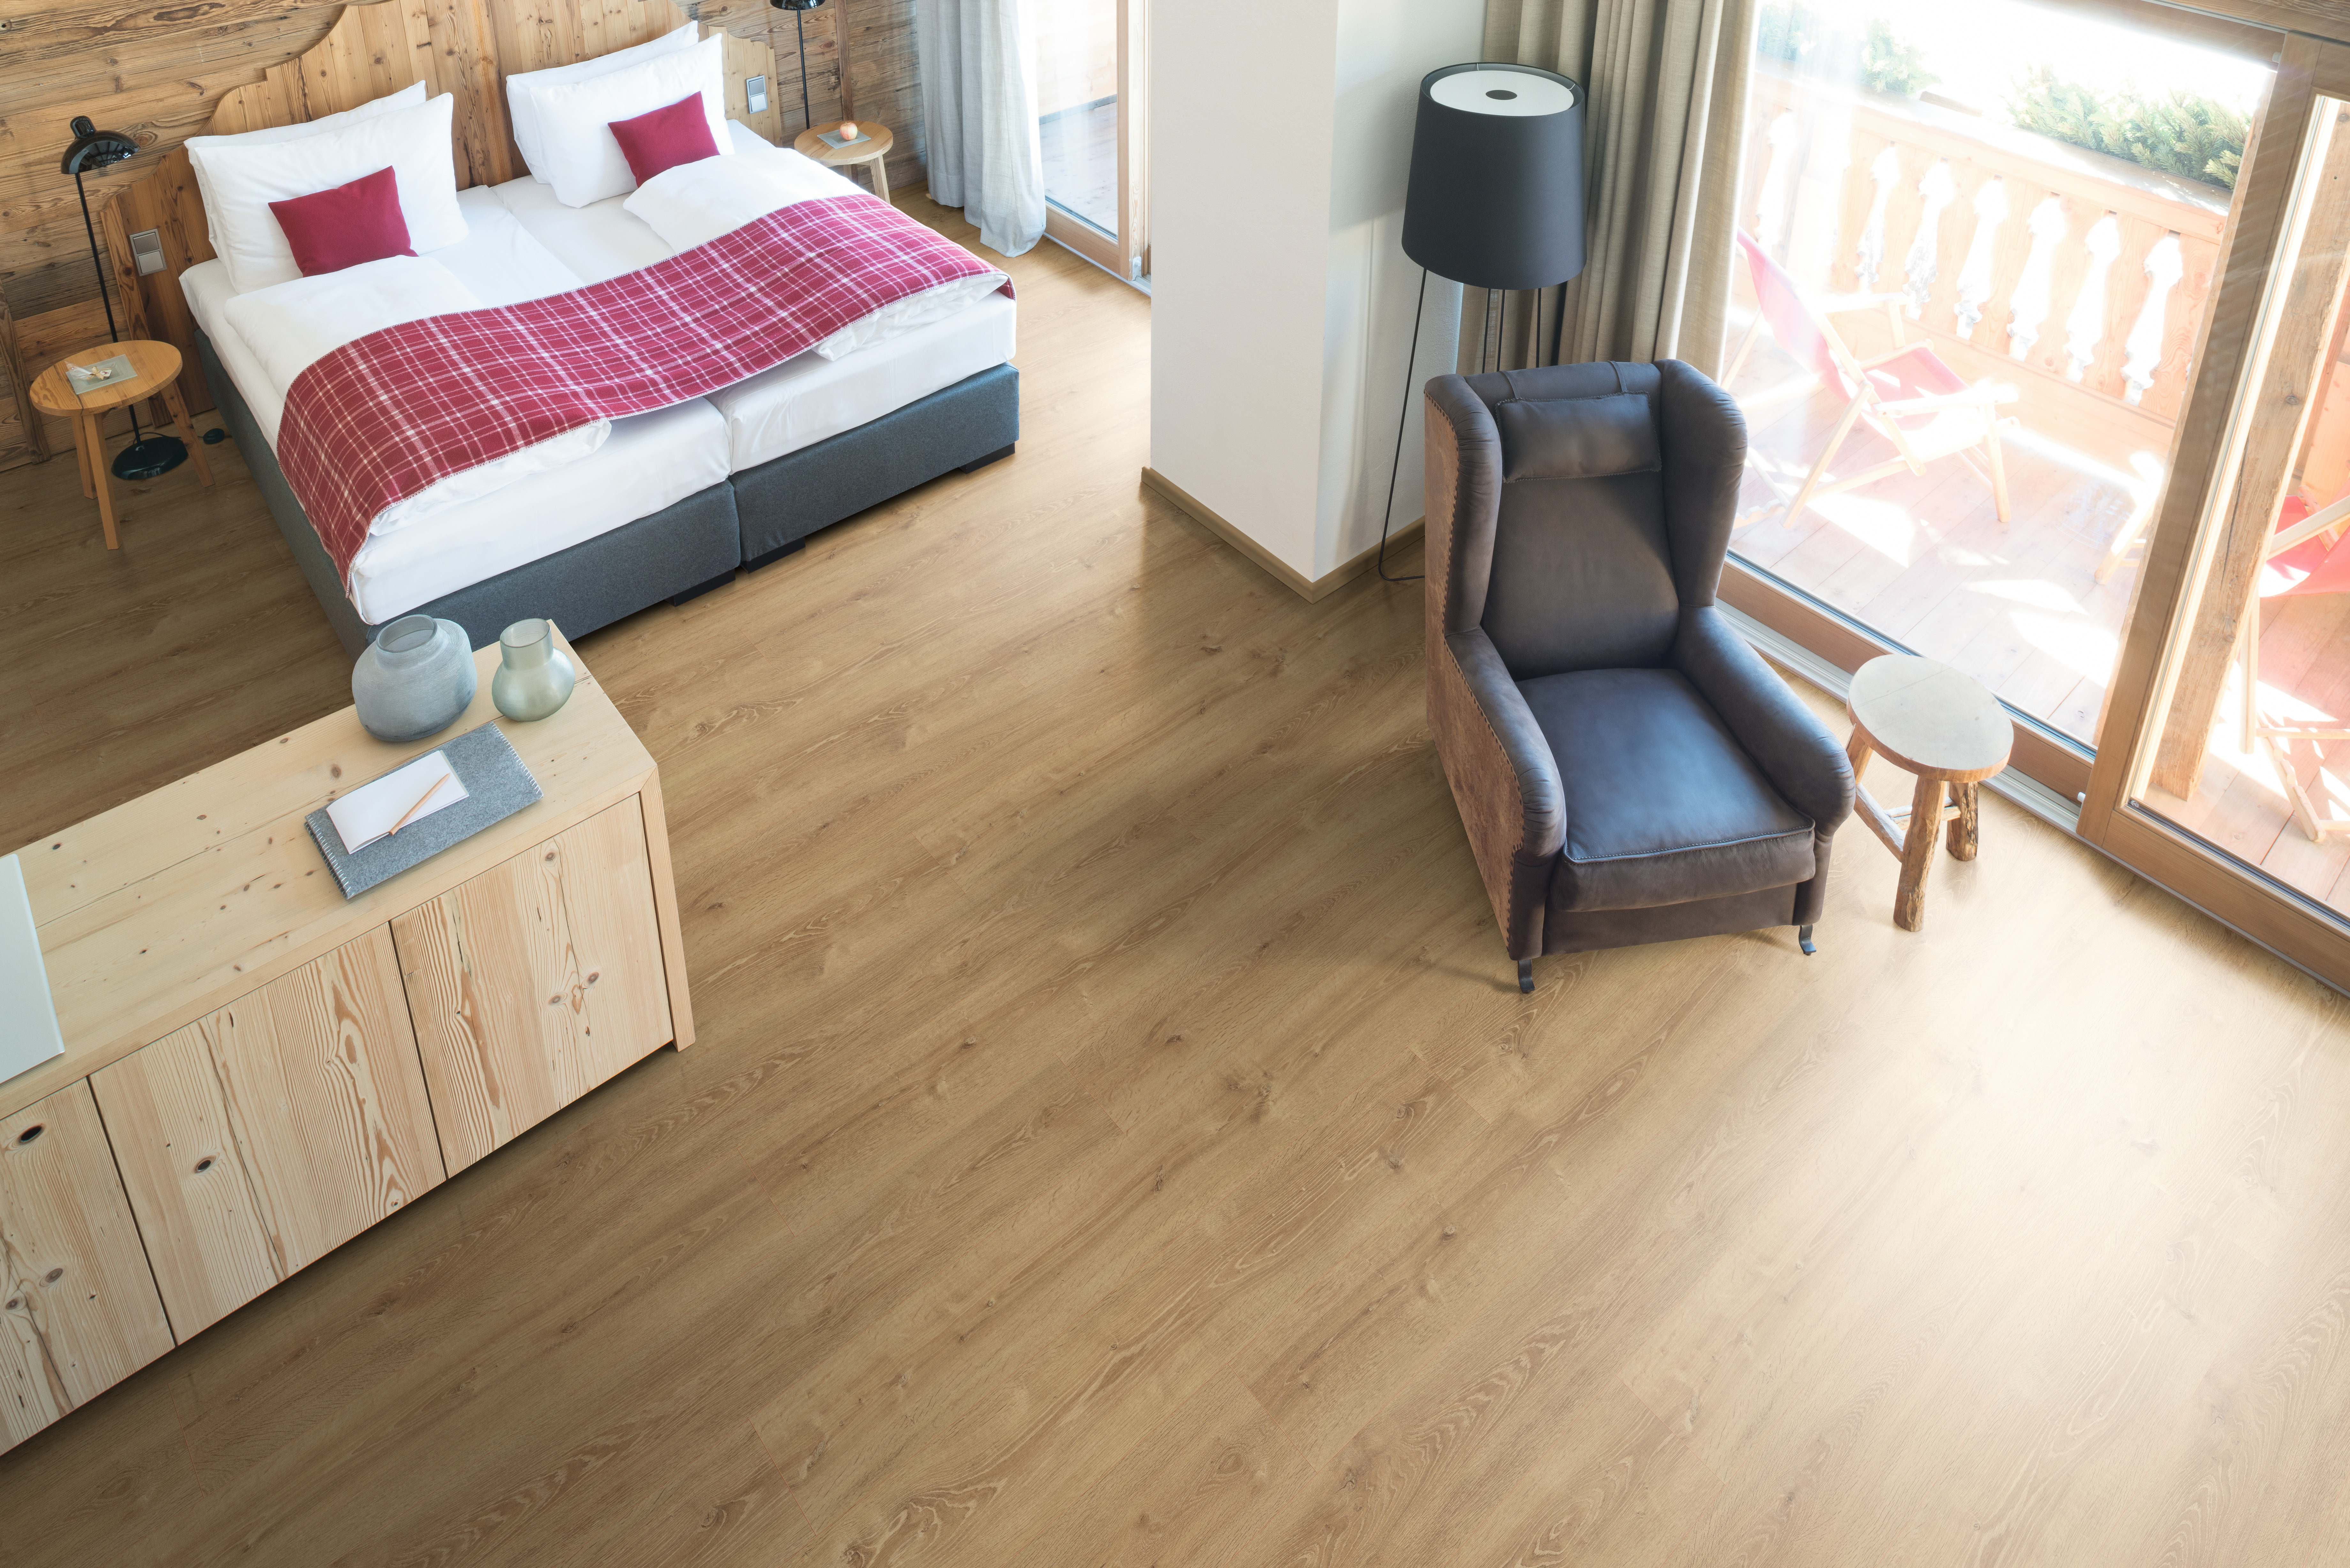 Long floorboards for large, open spaces